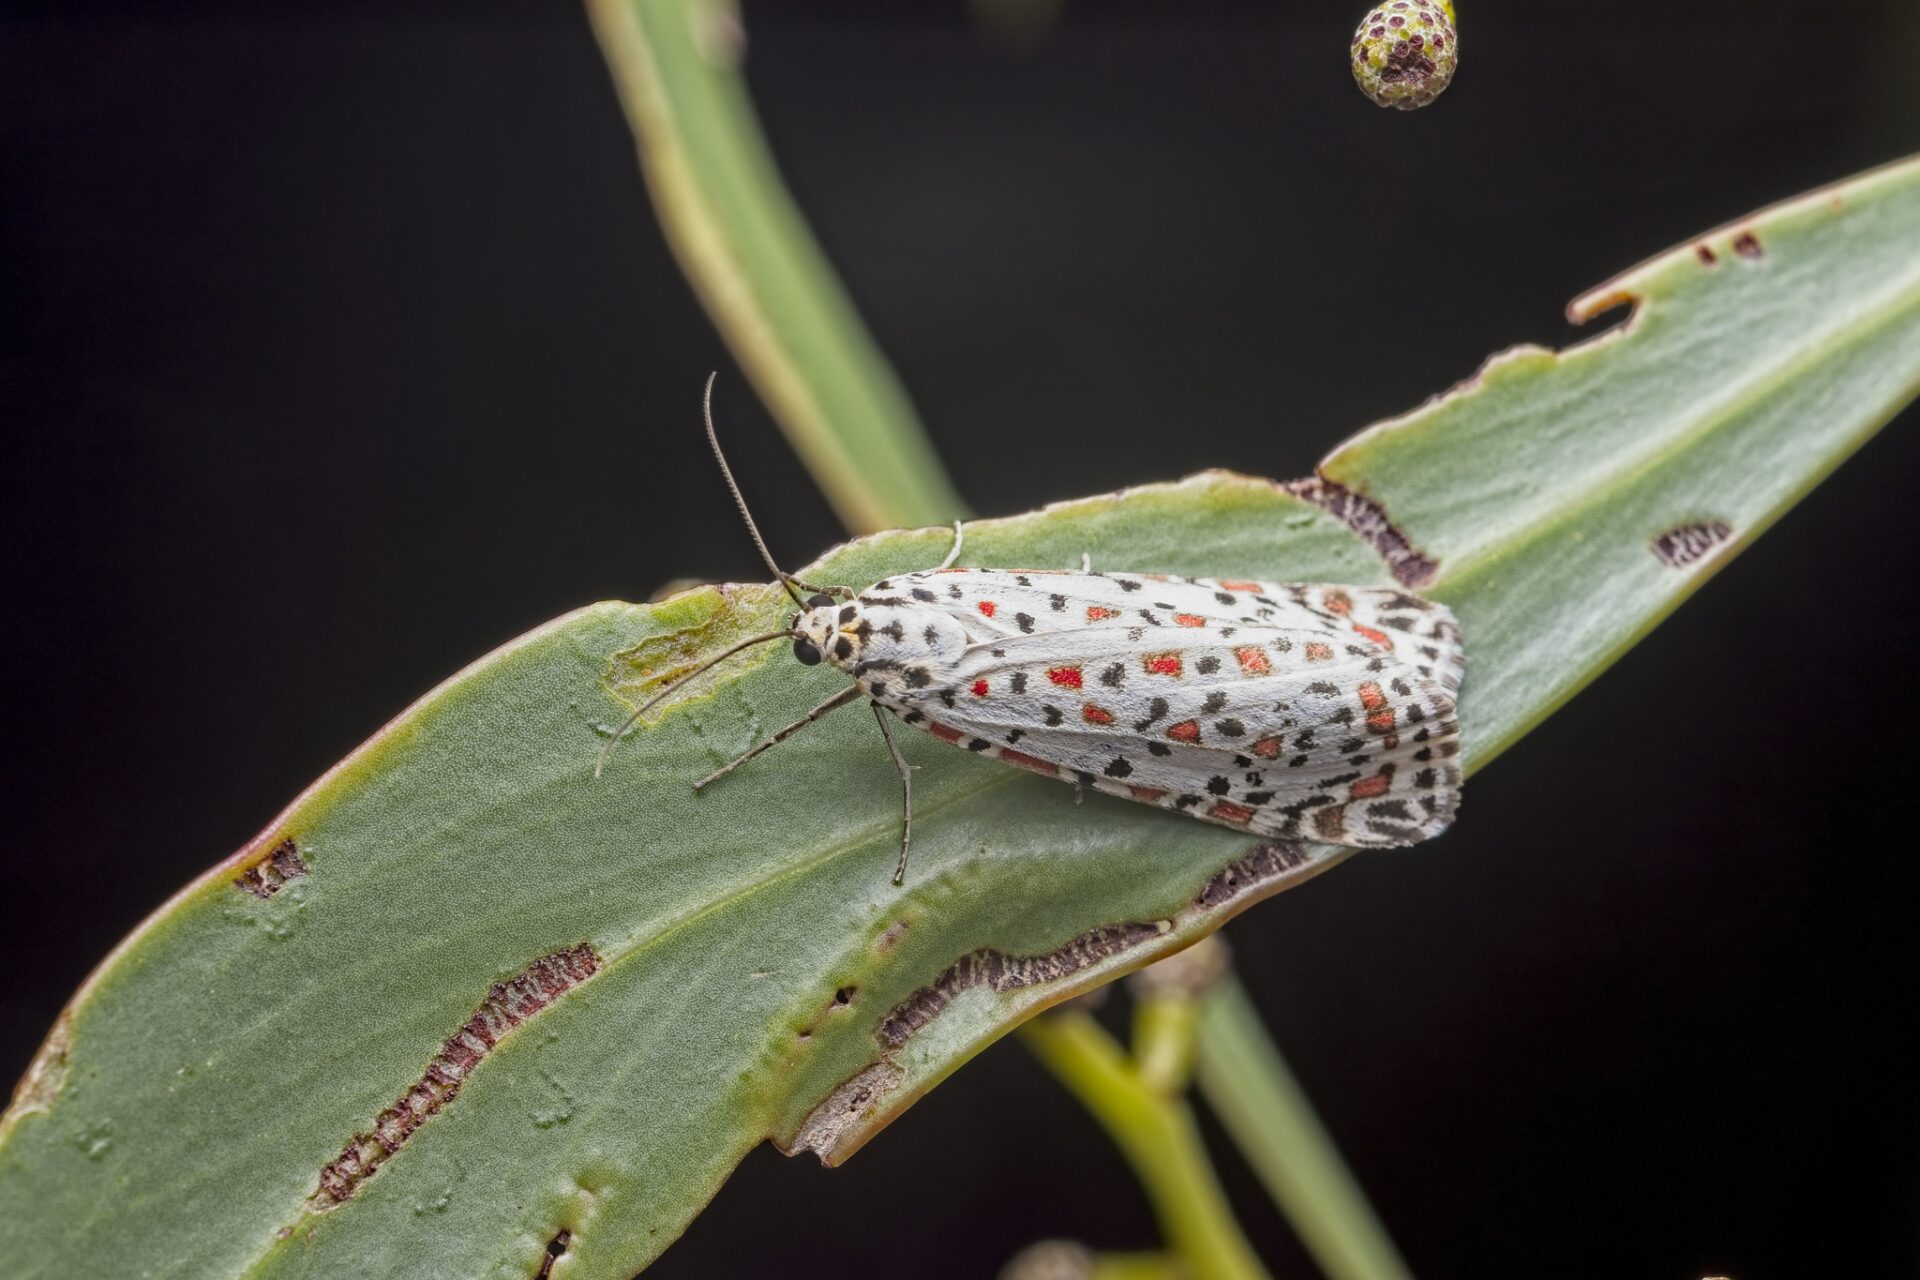 A Heliotrope Moth with black and red speckled white wings